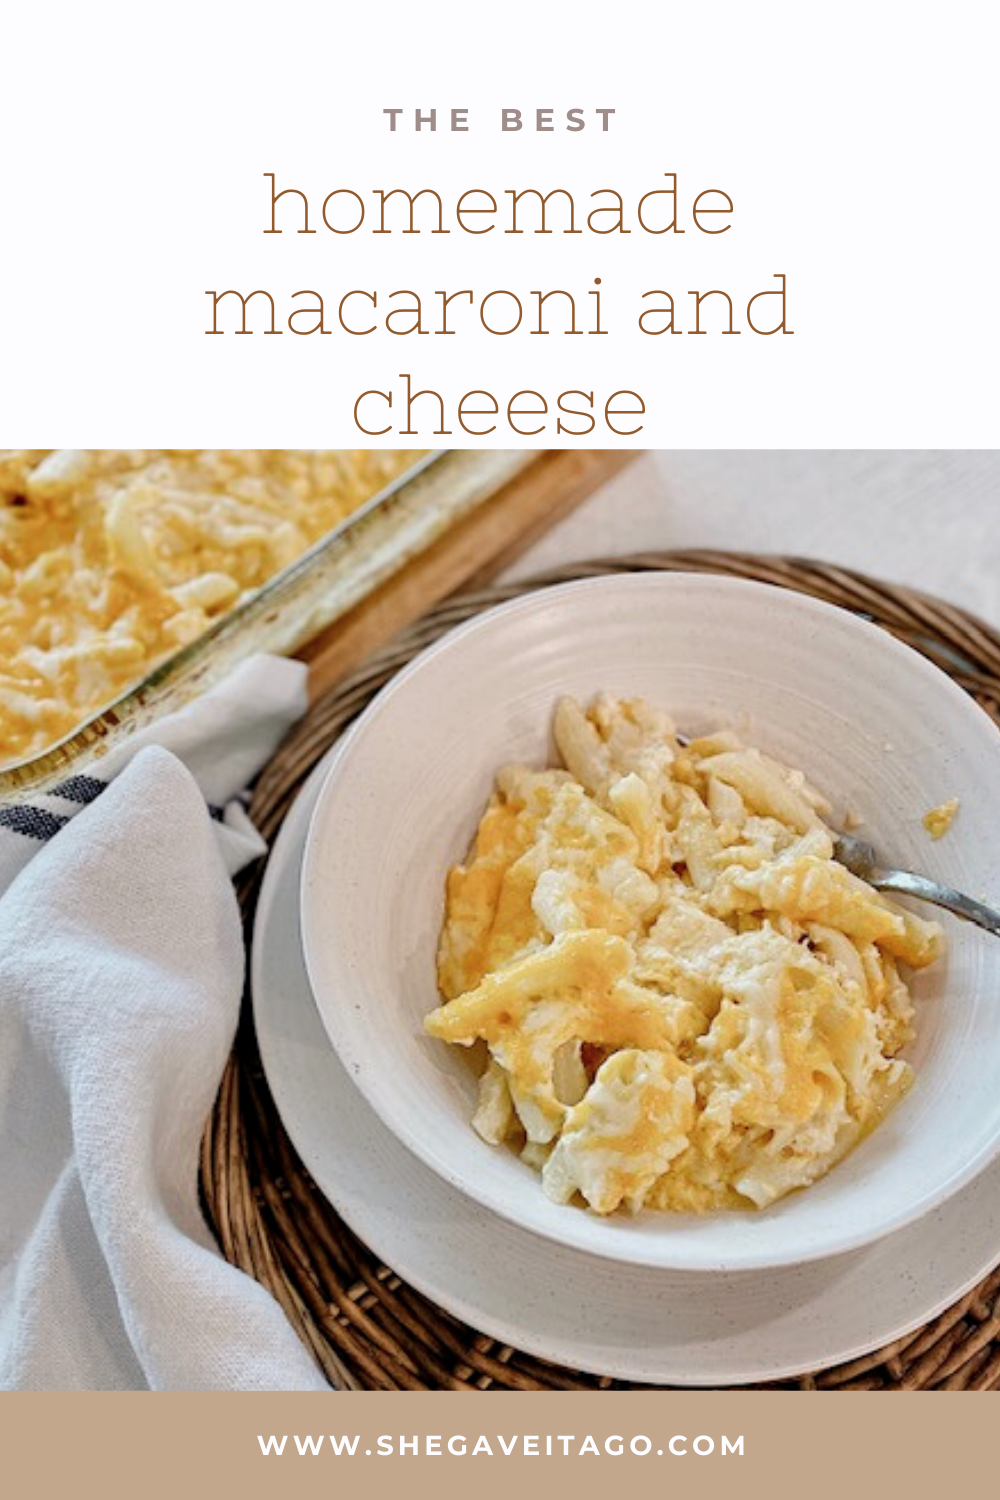 the besthomemademacncheese.png